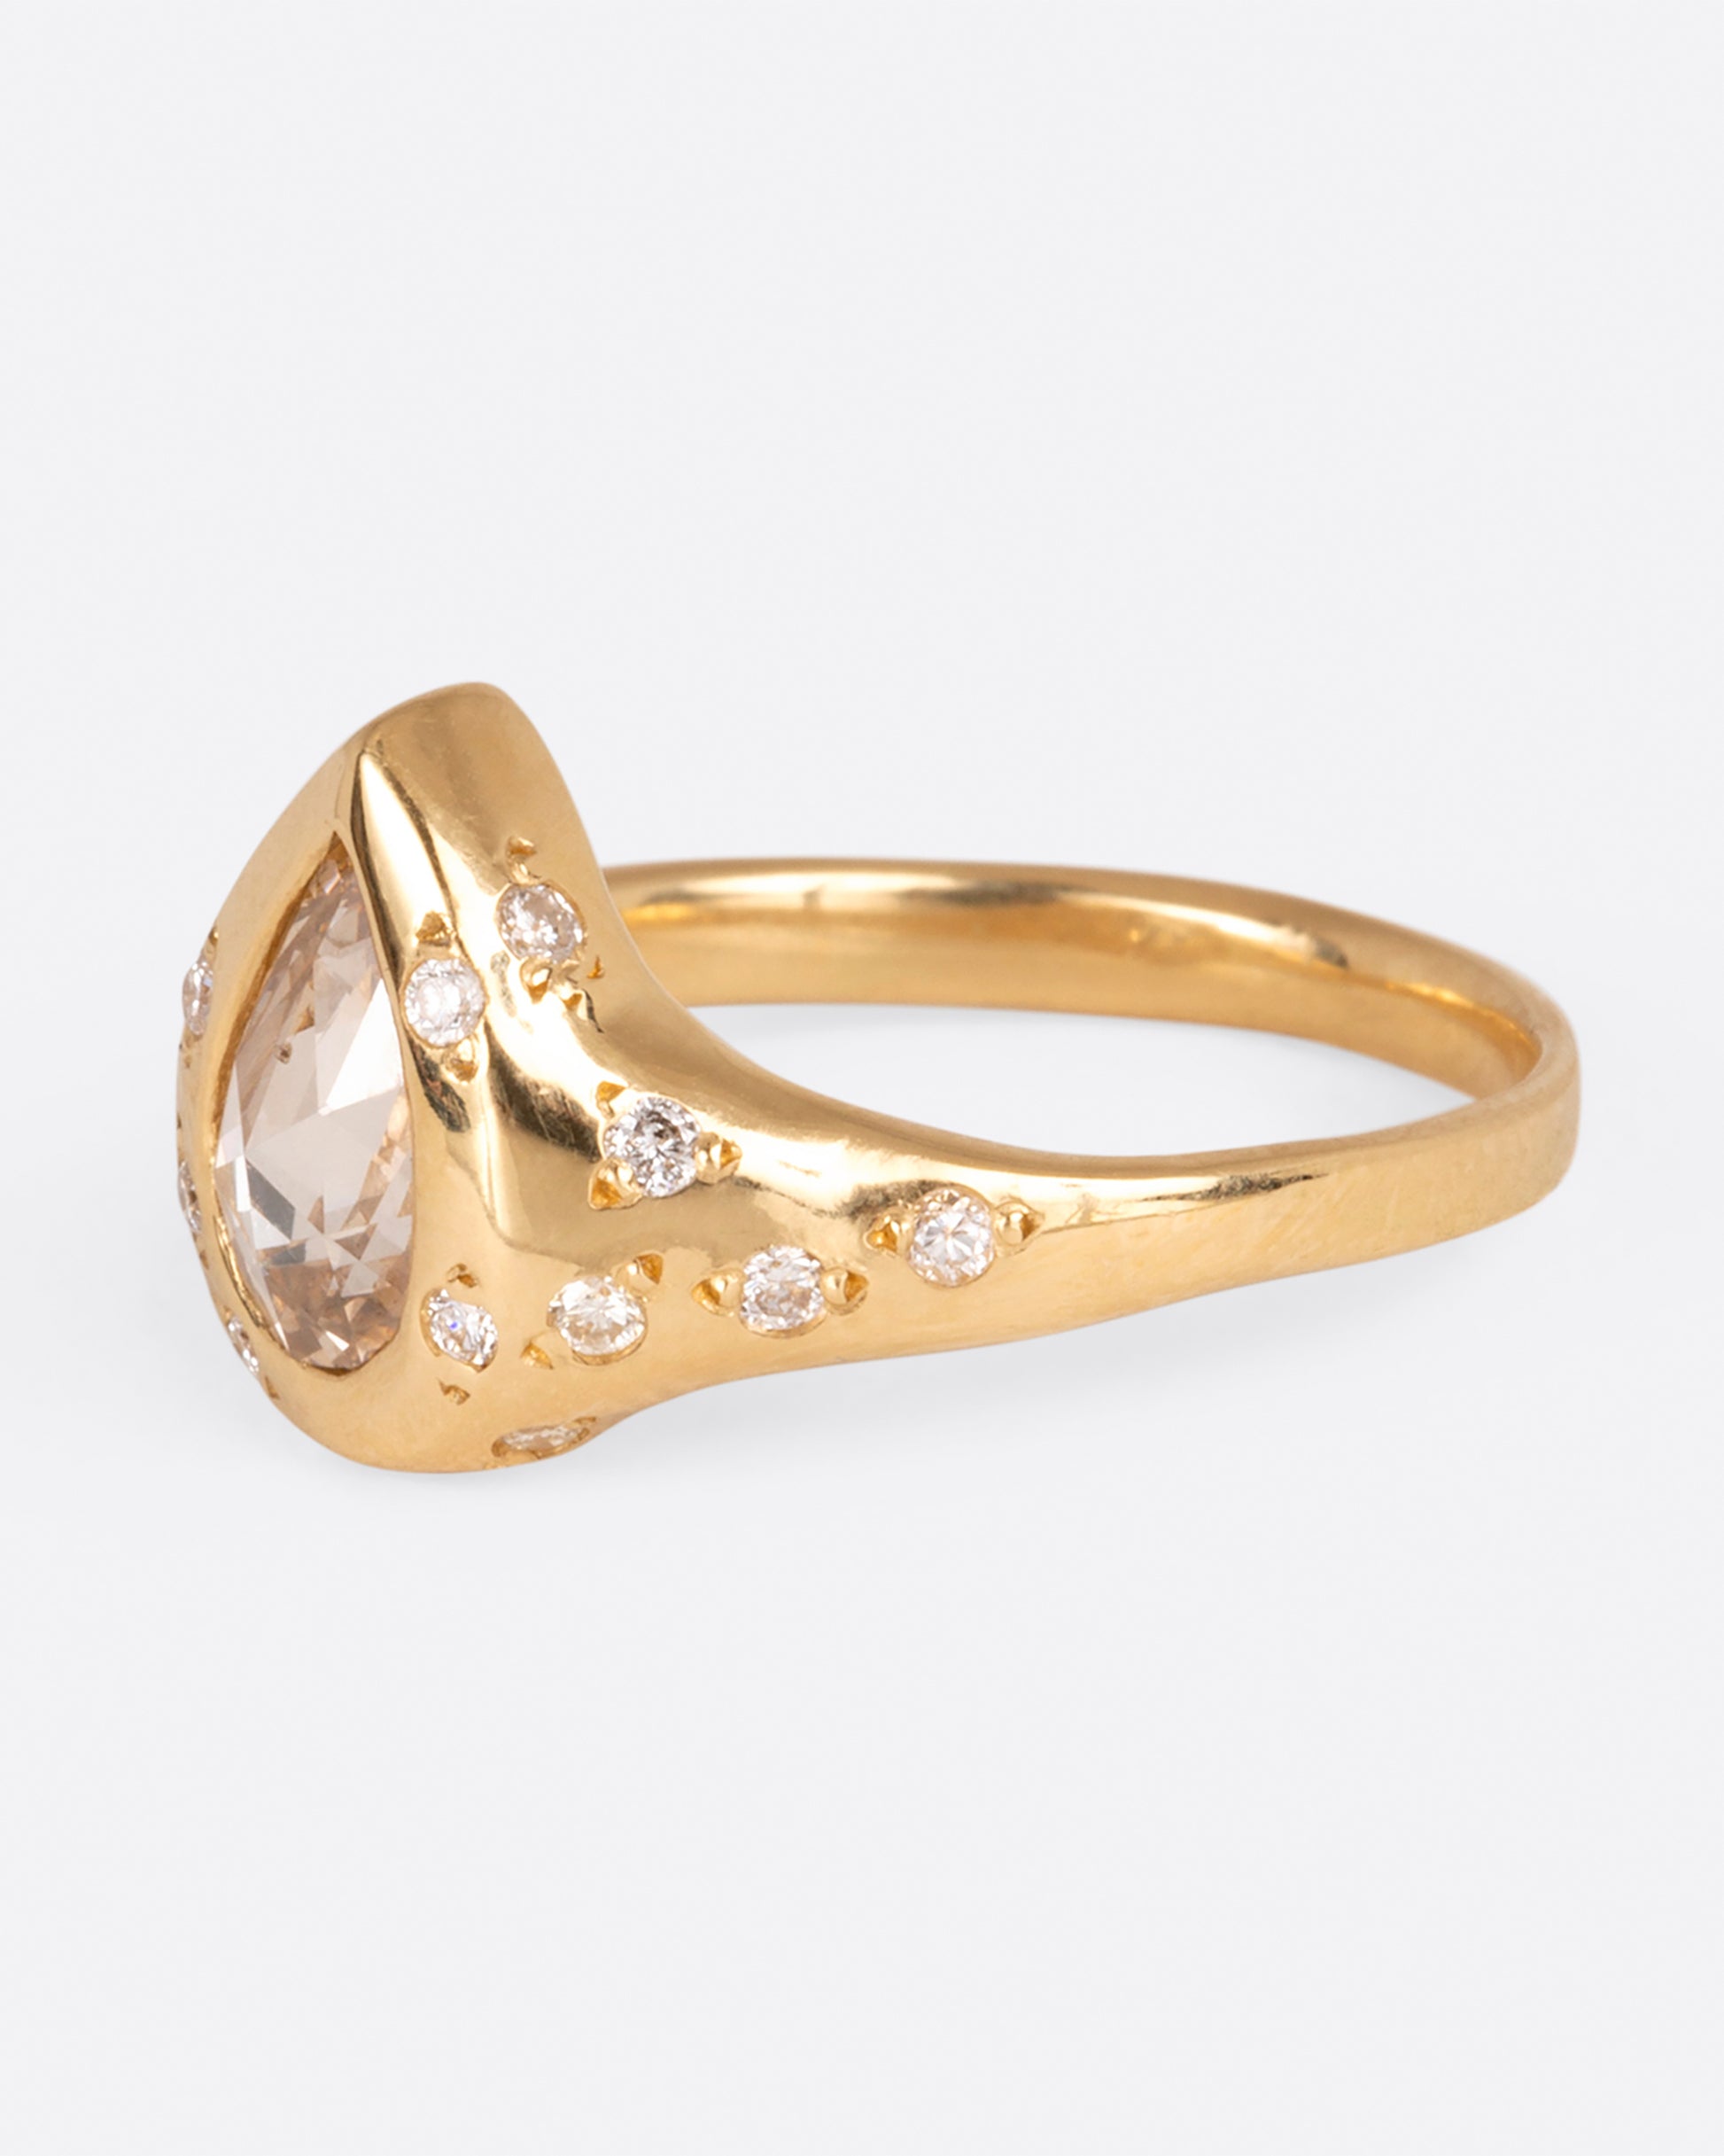 A yellow gold ring with a pear shaped diamond center stone and round white diamonds dotting the band, shown from the side.